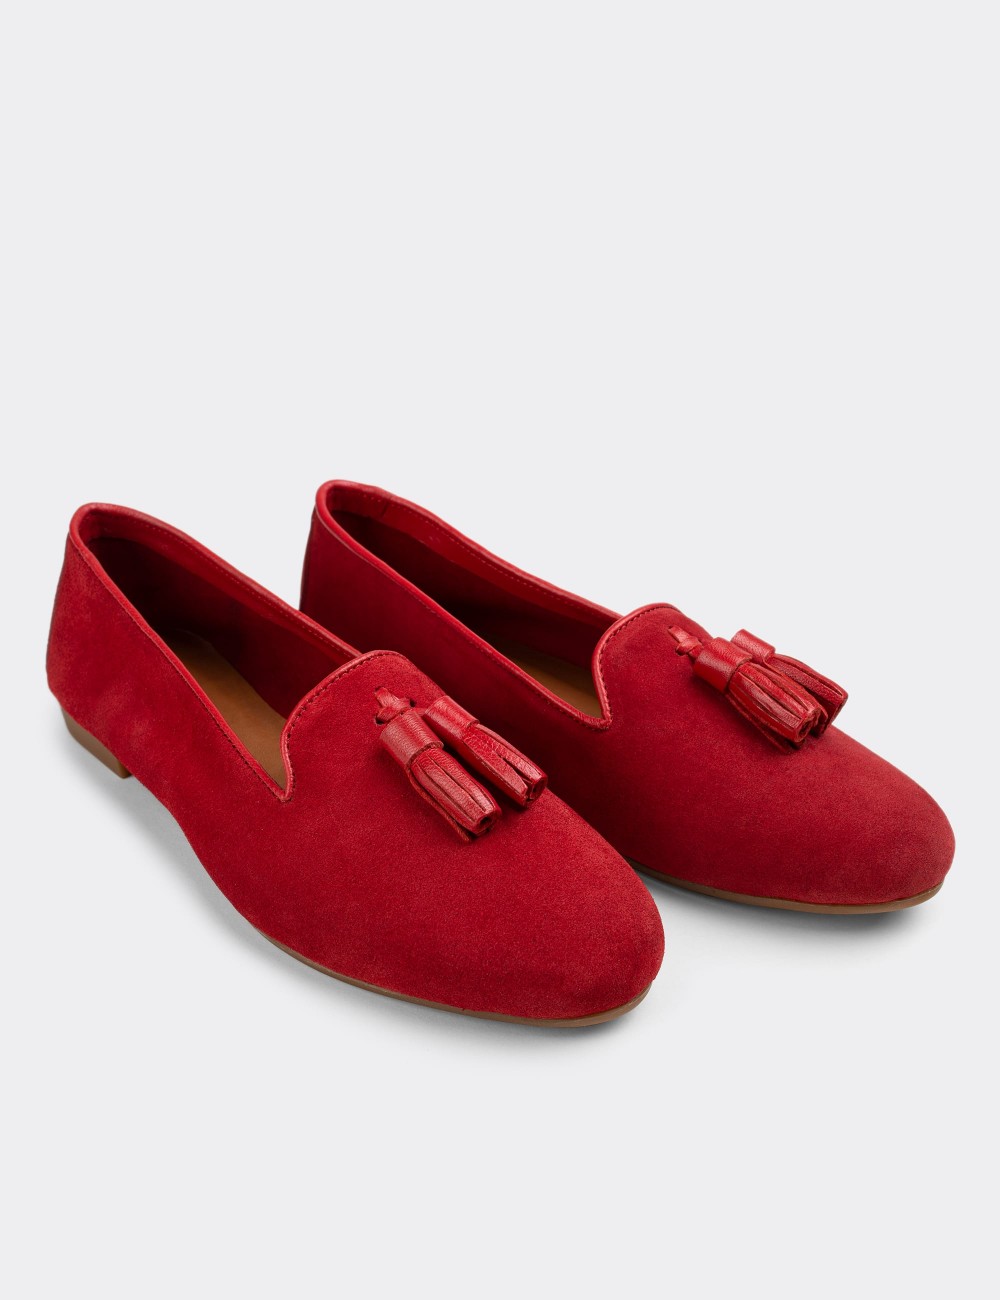 Red Suede Leather Loafers - E3204ZKRMC02